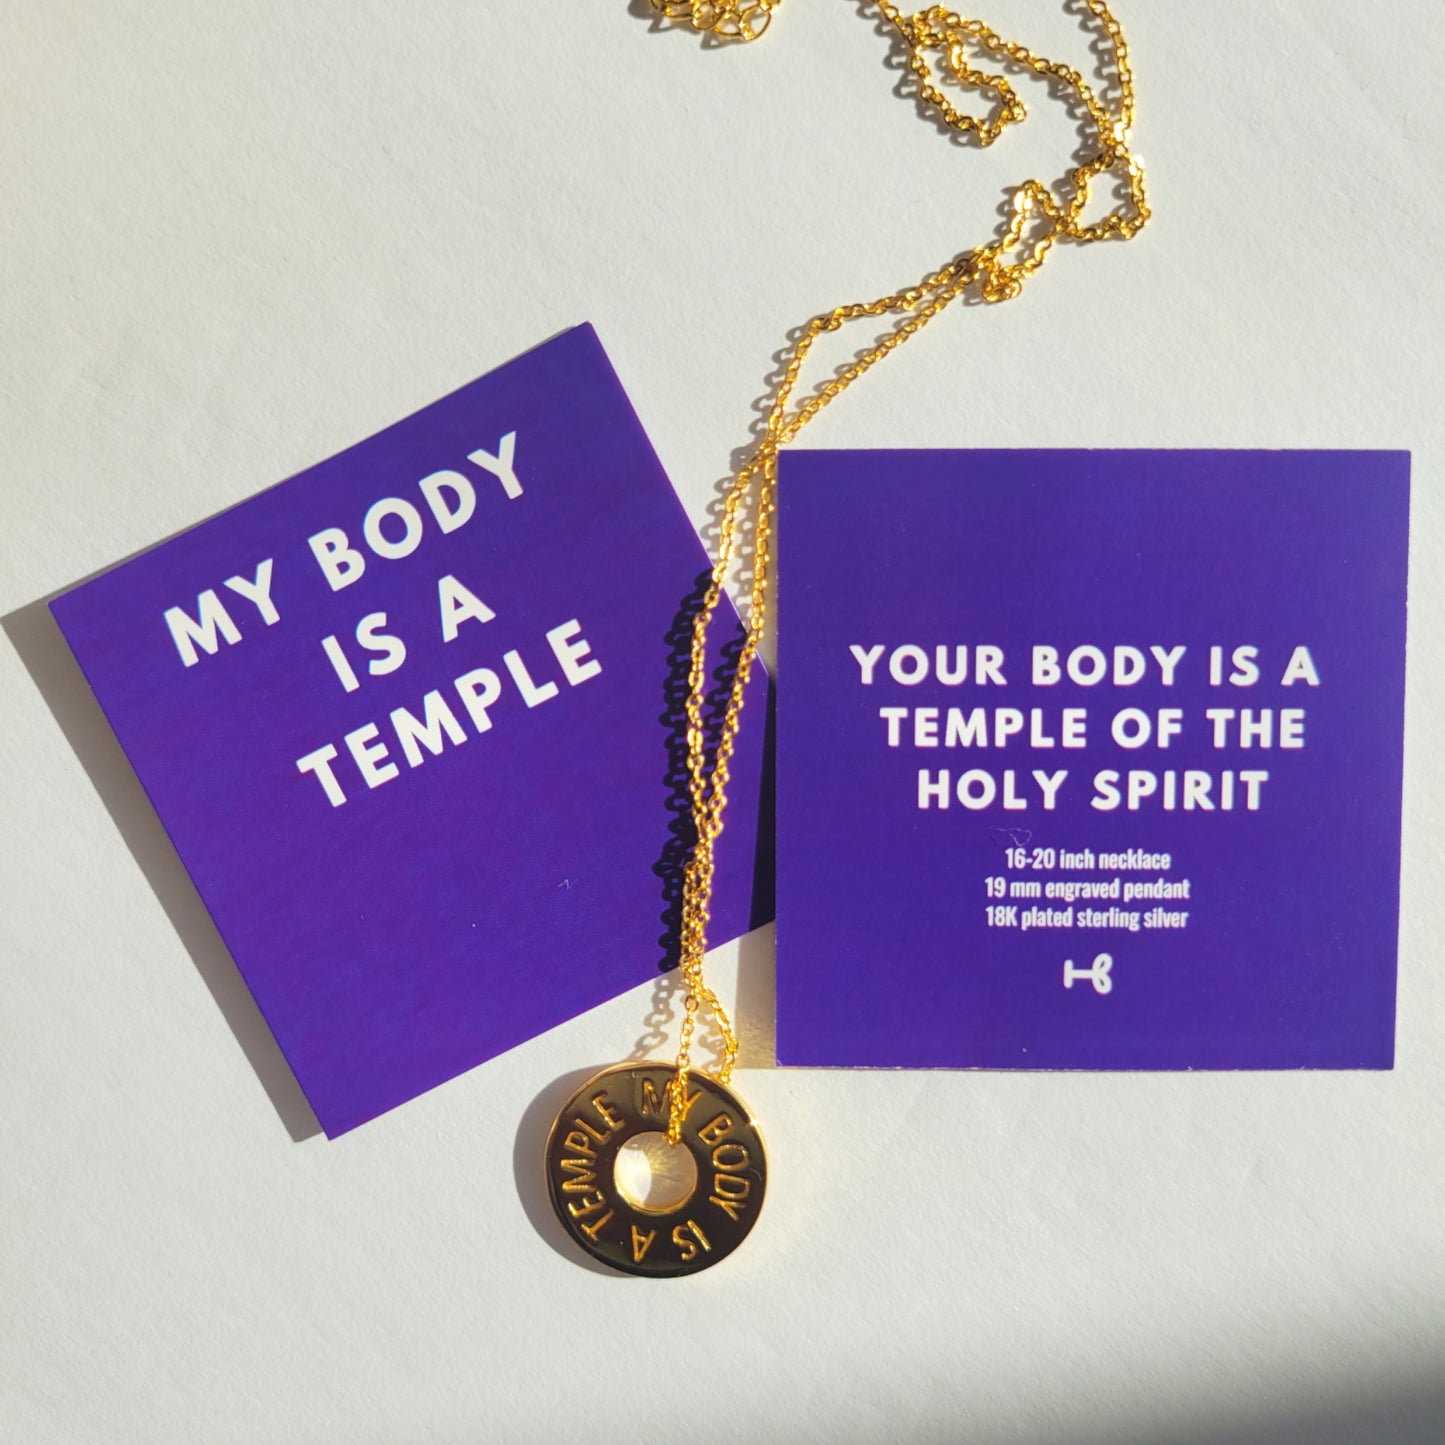 MY BODY IS A TEMPLE NECKLACE